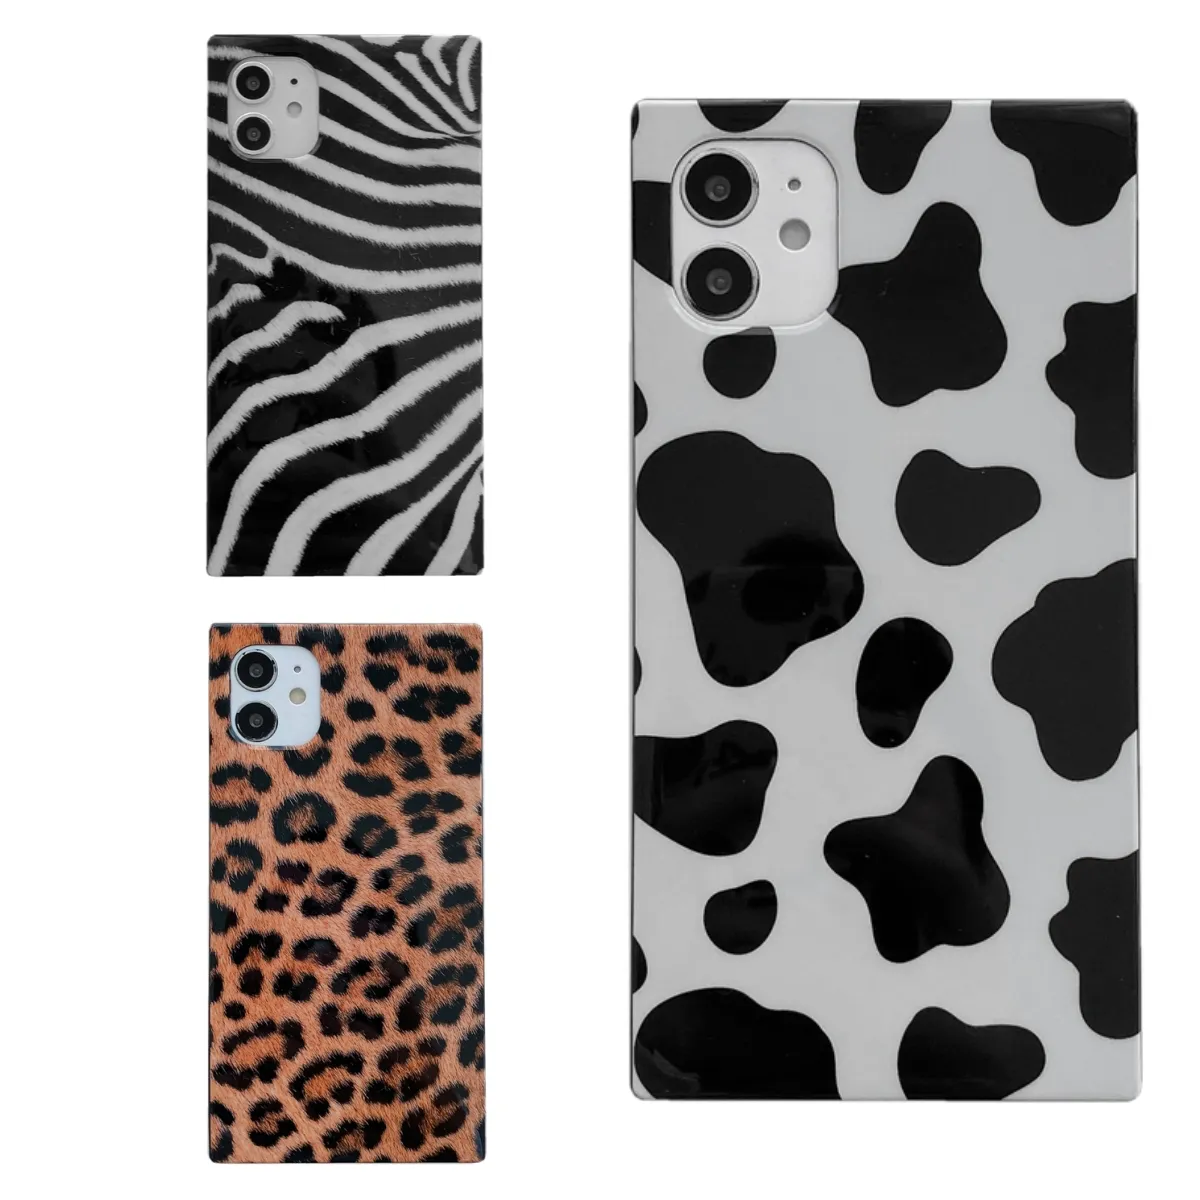 IPhone 15スクエアケースの場合、Leopard Zebra Cow Pattern Glossy Soft Flexible TPU Cover Phone Case for iPhone 11 12 13 14 15 Pro Max